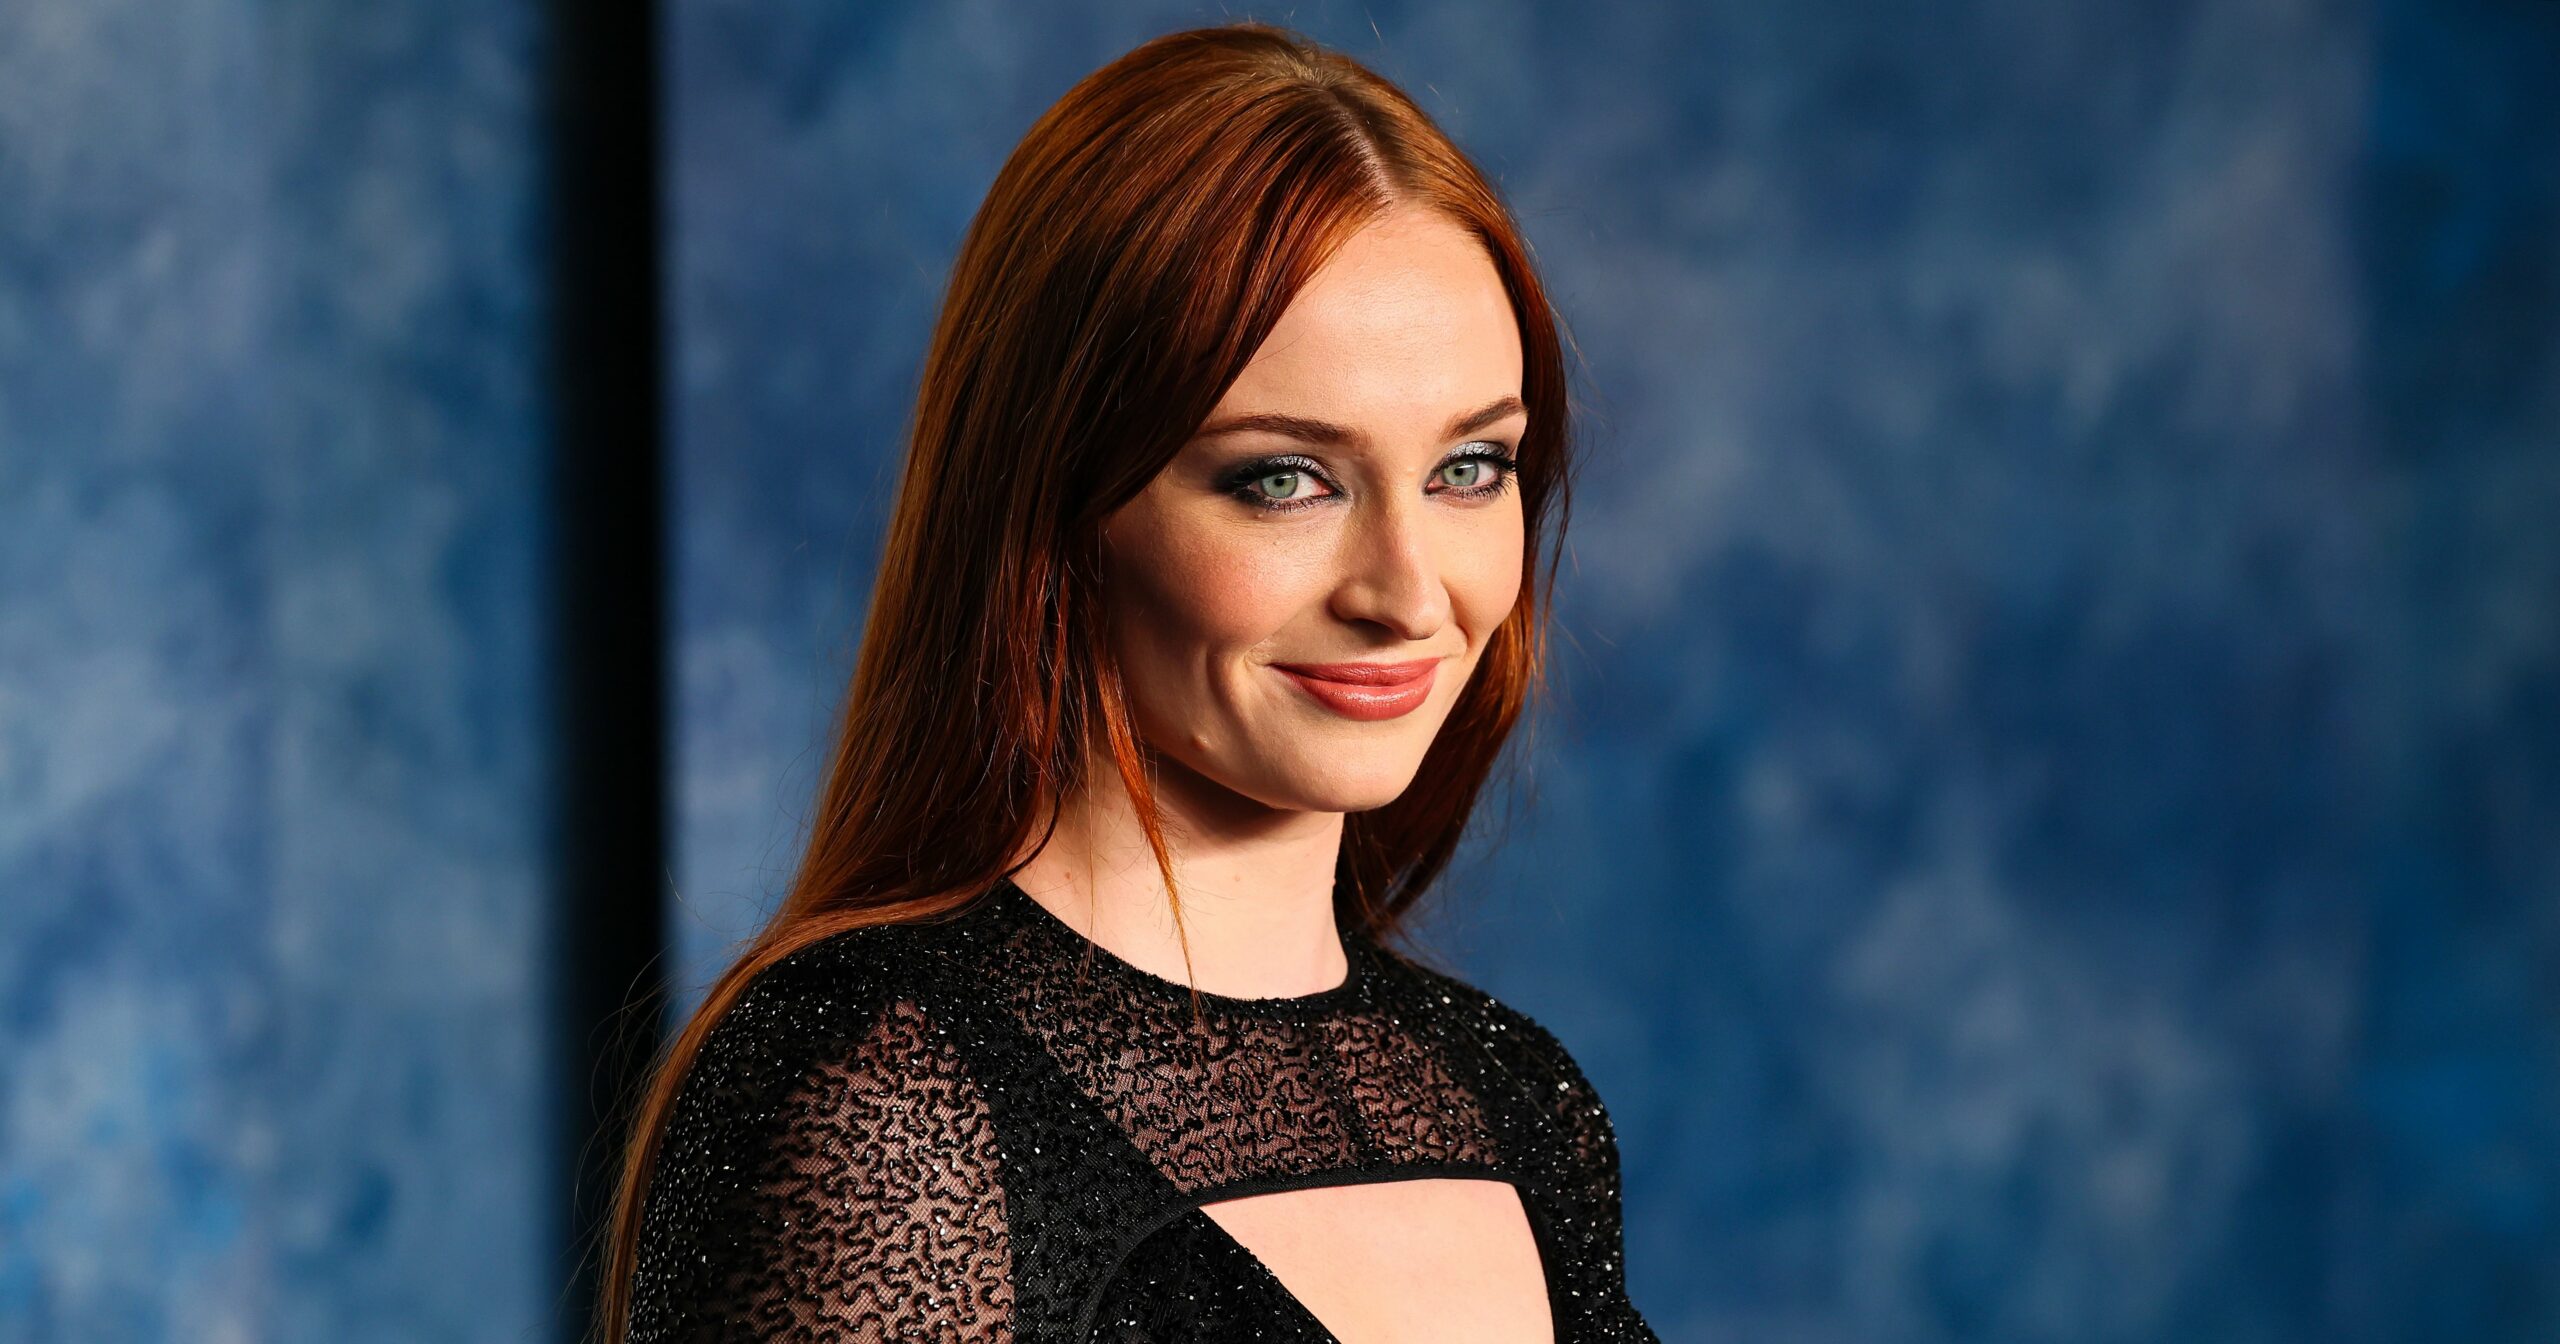 sophie-turner’s-romantic-history-includes-musicians-–-and-now,-a-british-aristocrat